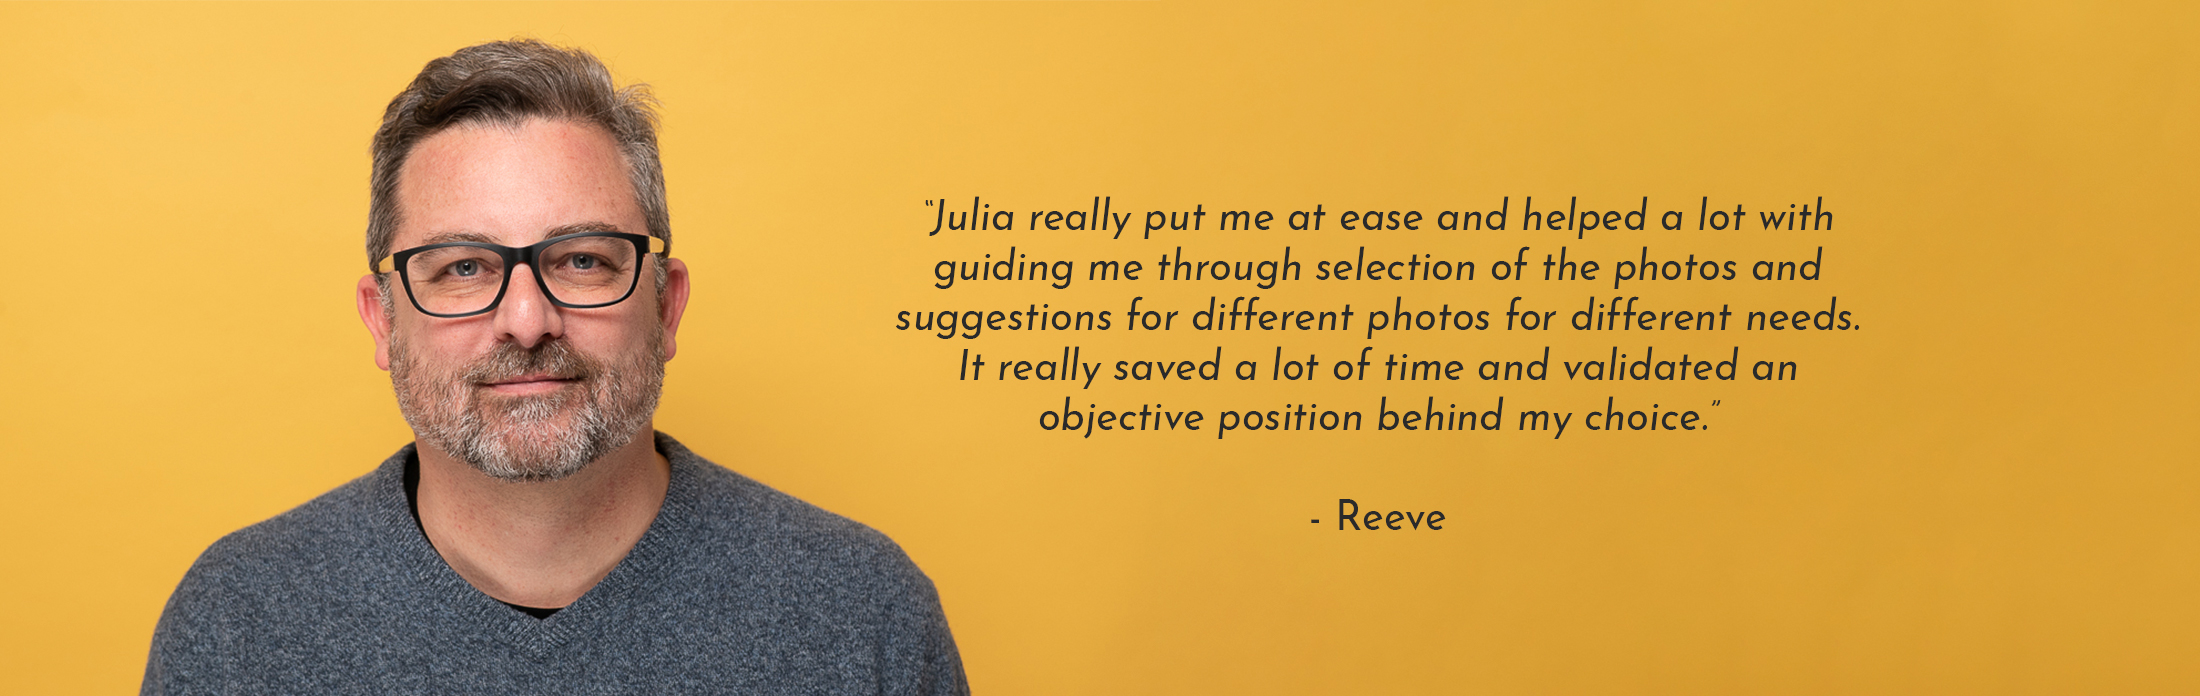 Text Reads: “Julia really put me at ease and helped a lot with guiding me through selection of the photos and suggestions for different photos for different needs. It really saved a lot of time and validated an objective position behind my choice.” - Reeve